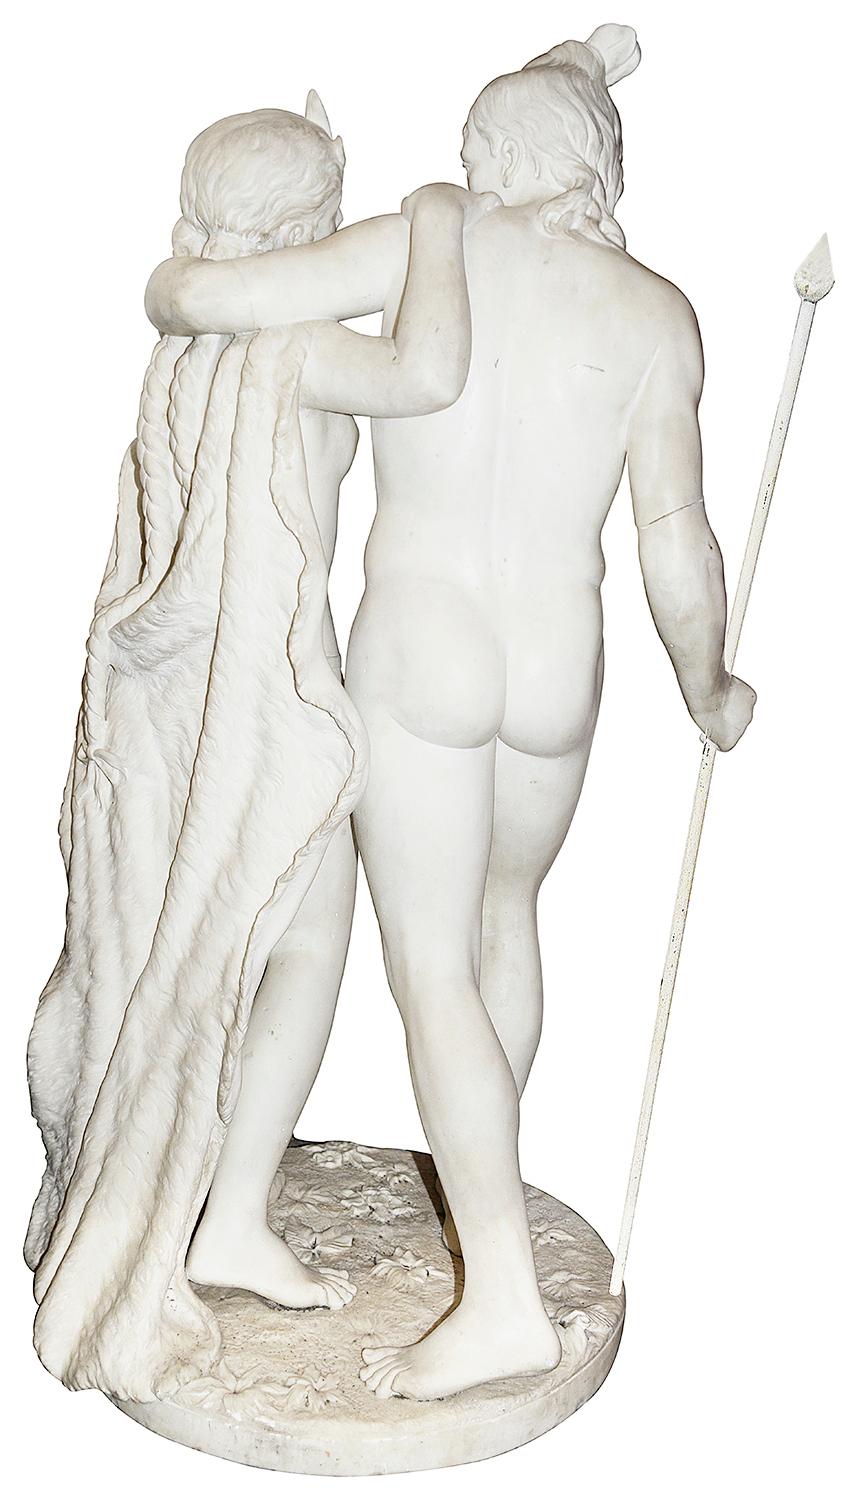 Hand-Carved Larger 19th Century Marble Statue of Hiawatha and Minnehaha